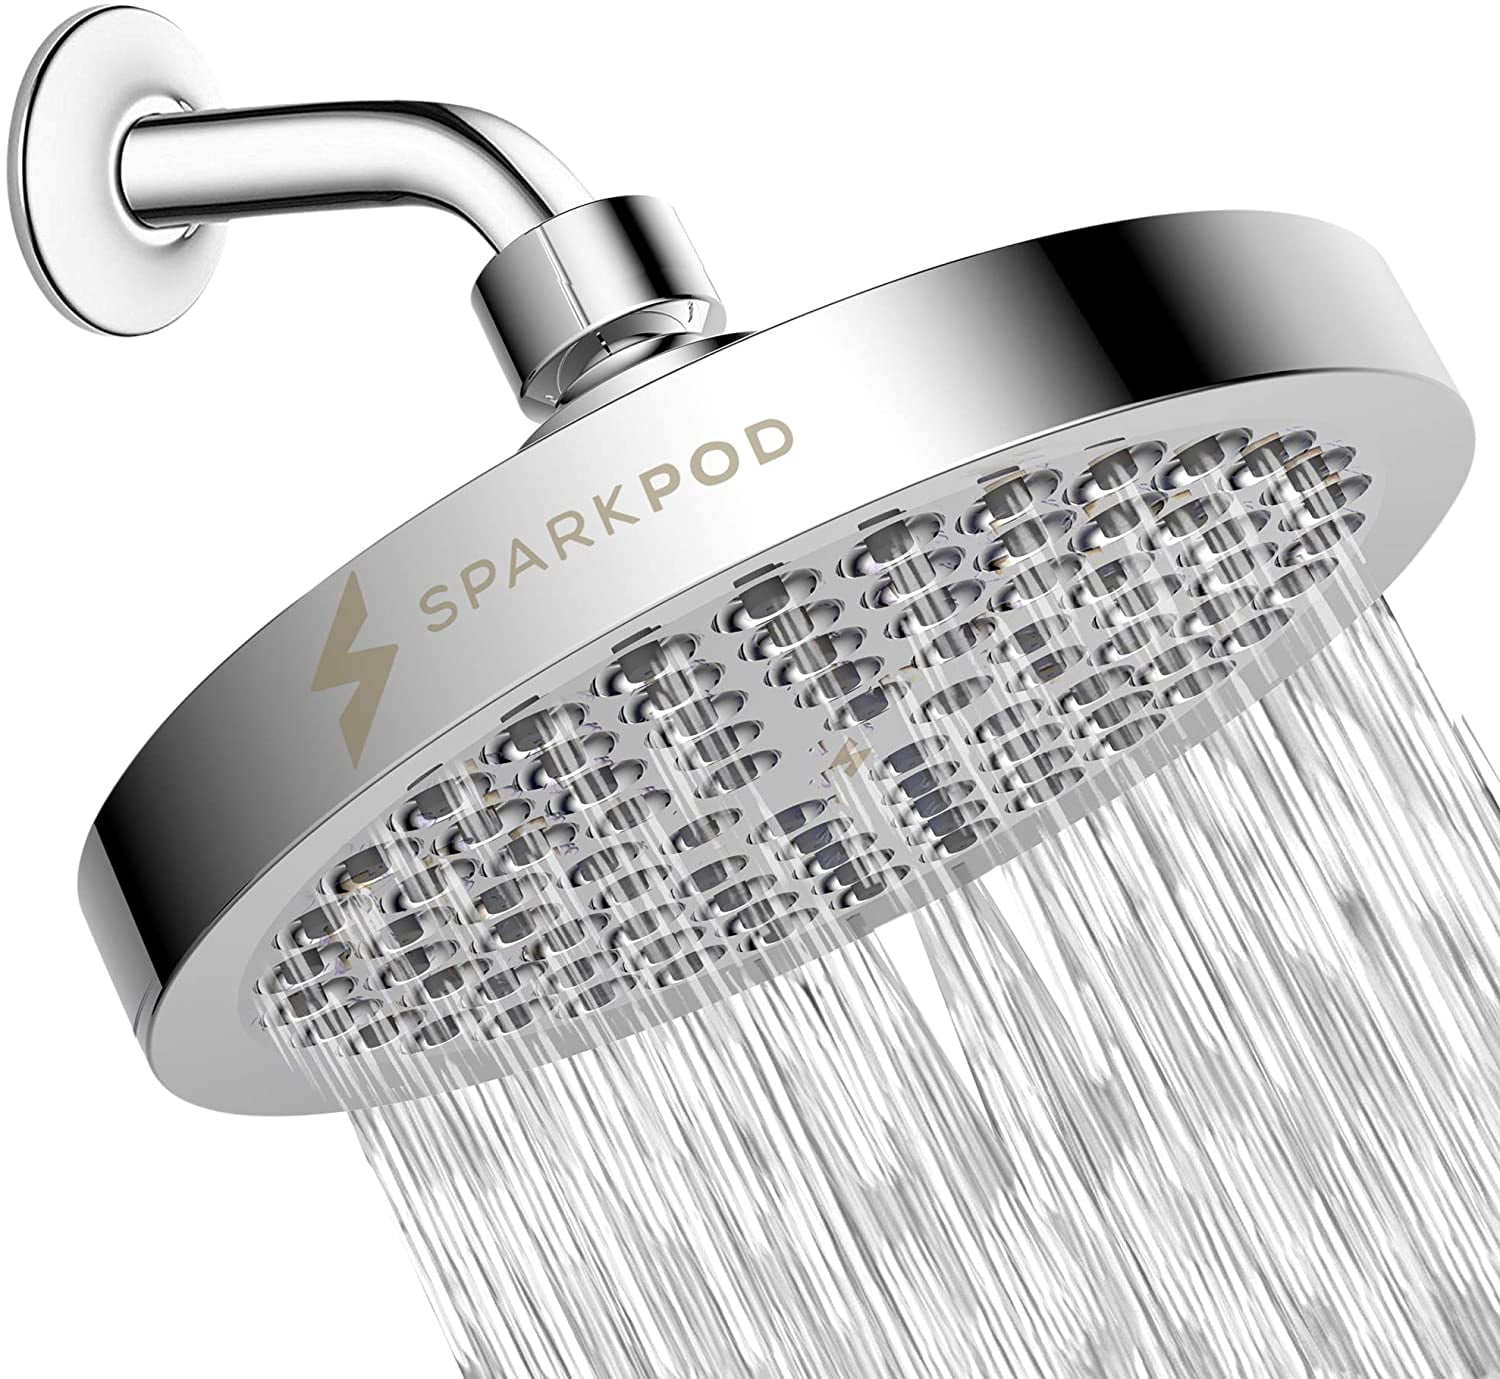 SparkPod High Pressure Rain Showerhead – Best Showerheads for Bathroom -  Adjustable Angle for Ultimate Bath Shower – 1-min Installation with Extra  